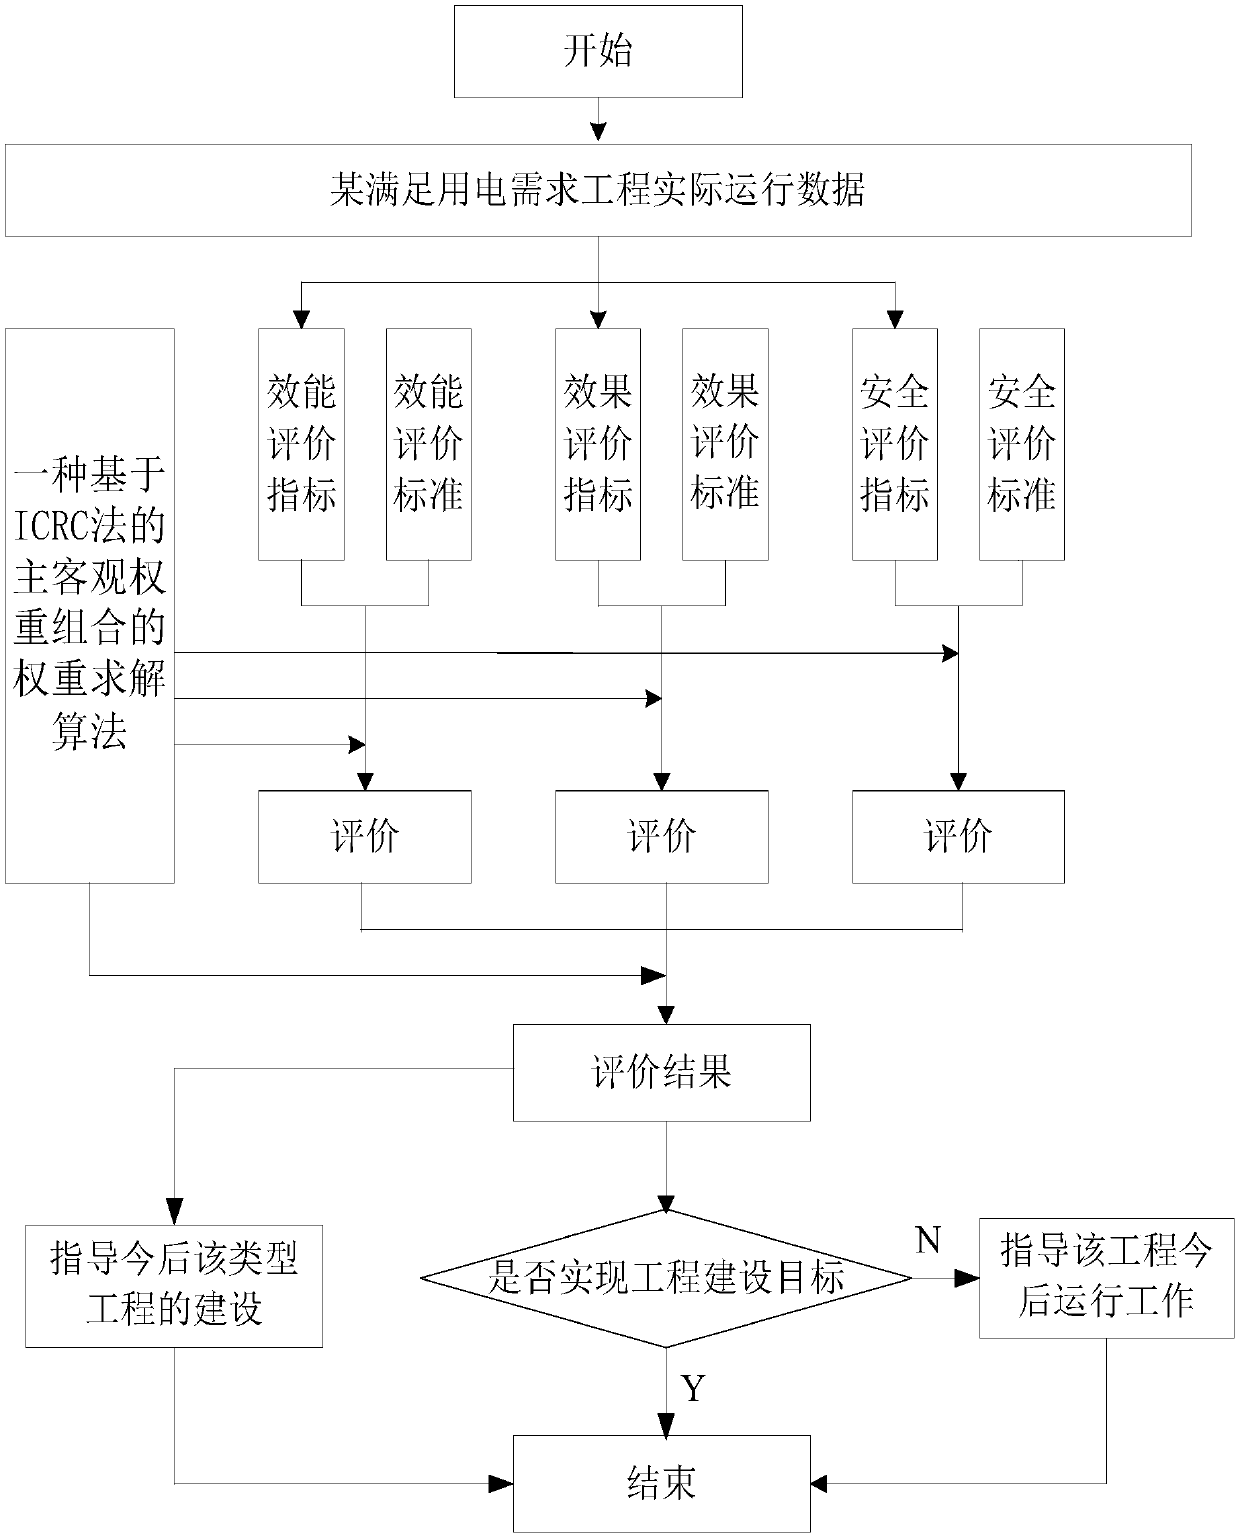 Electricity demand-satisfied power grid project operation benefit evaluation method and system